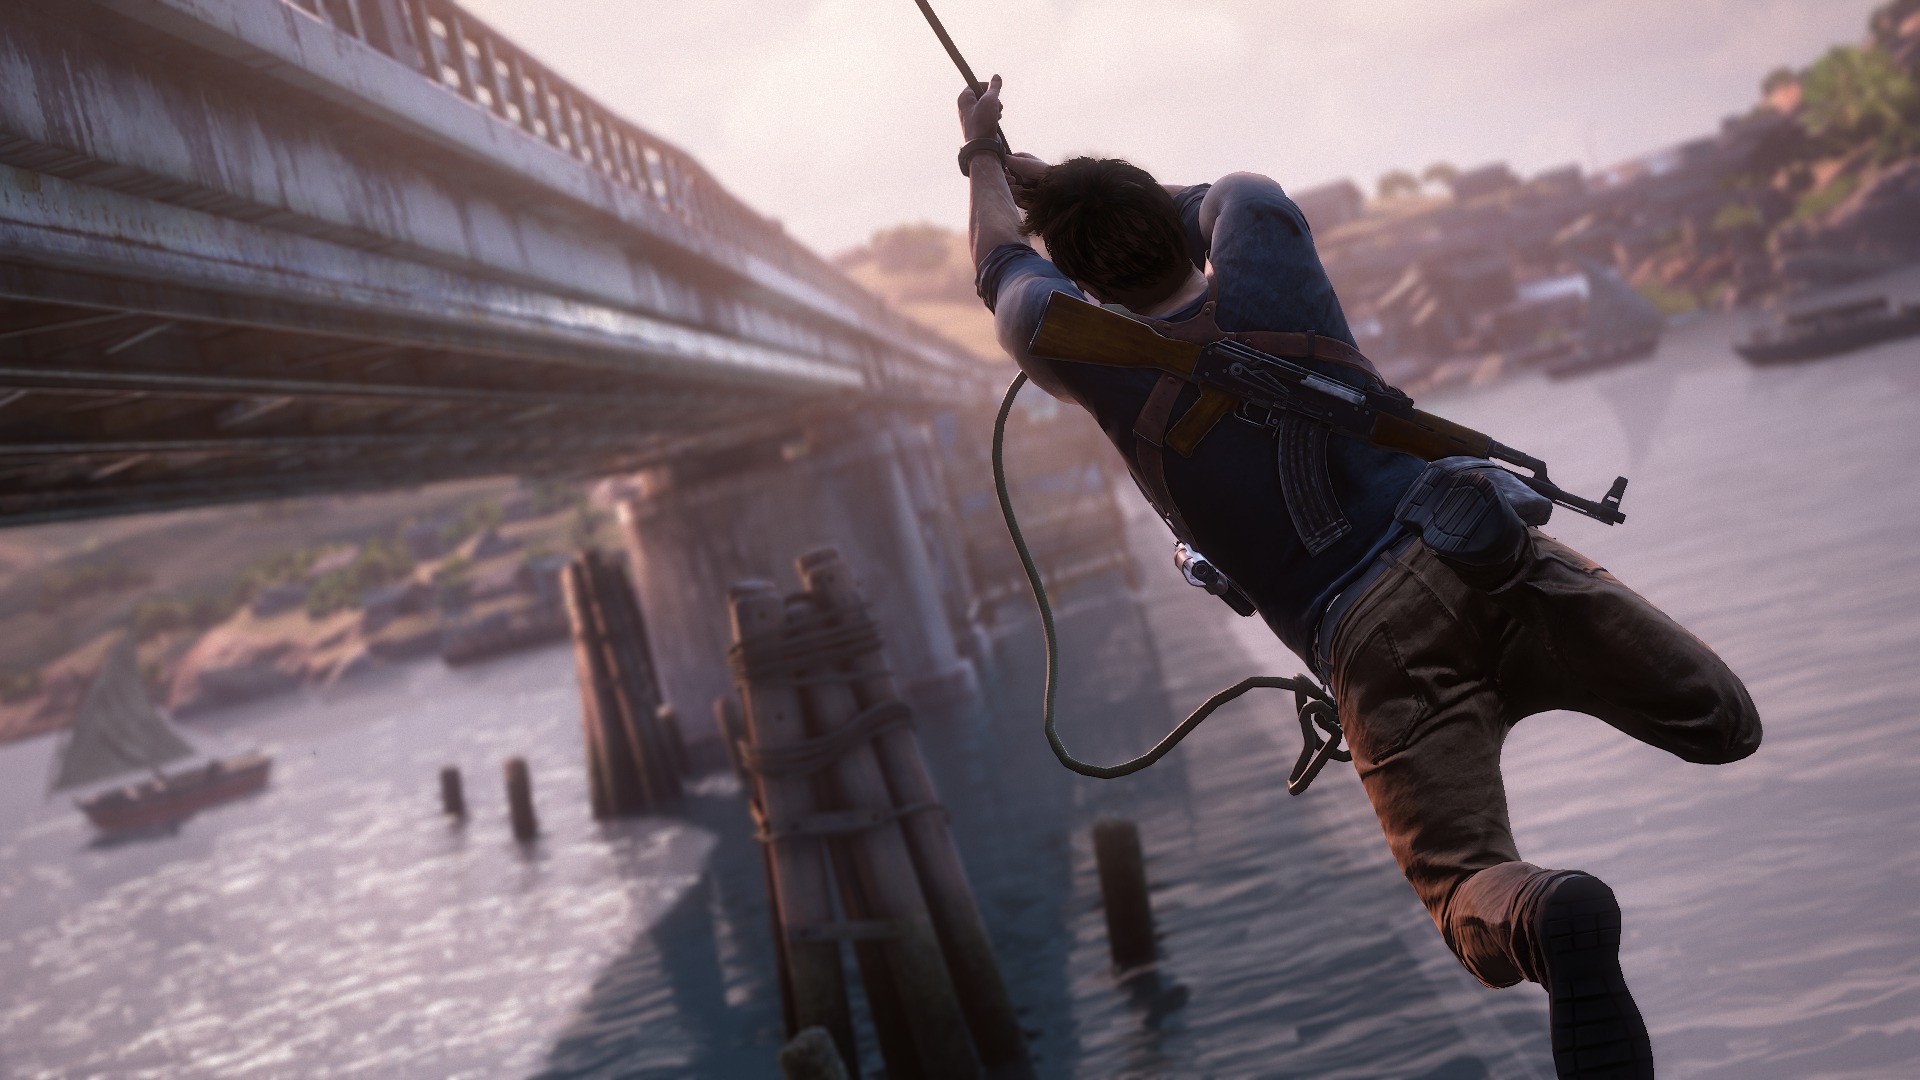 uncharted 4: a thief's end, video game, nathan drake, uncharted